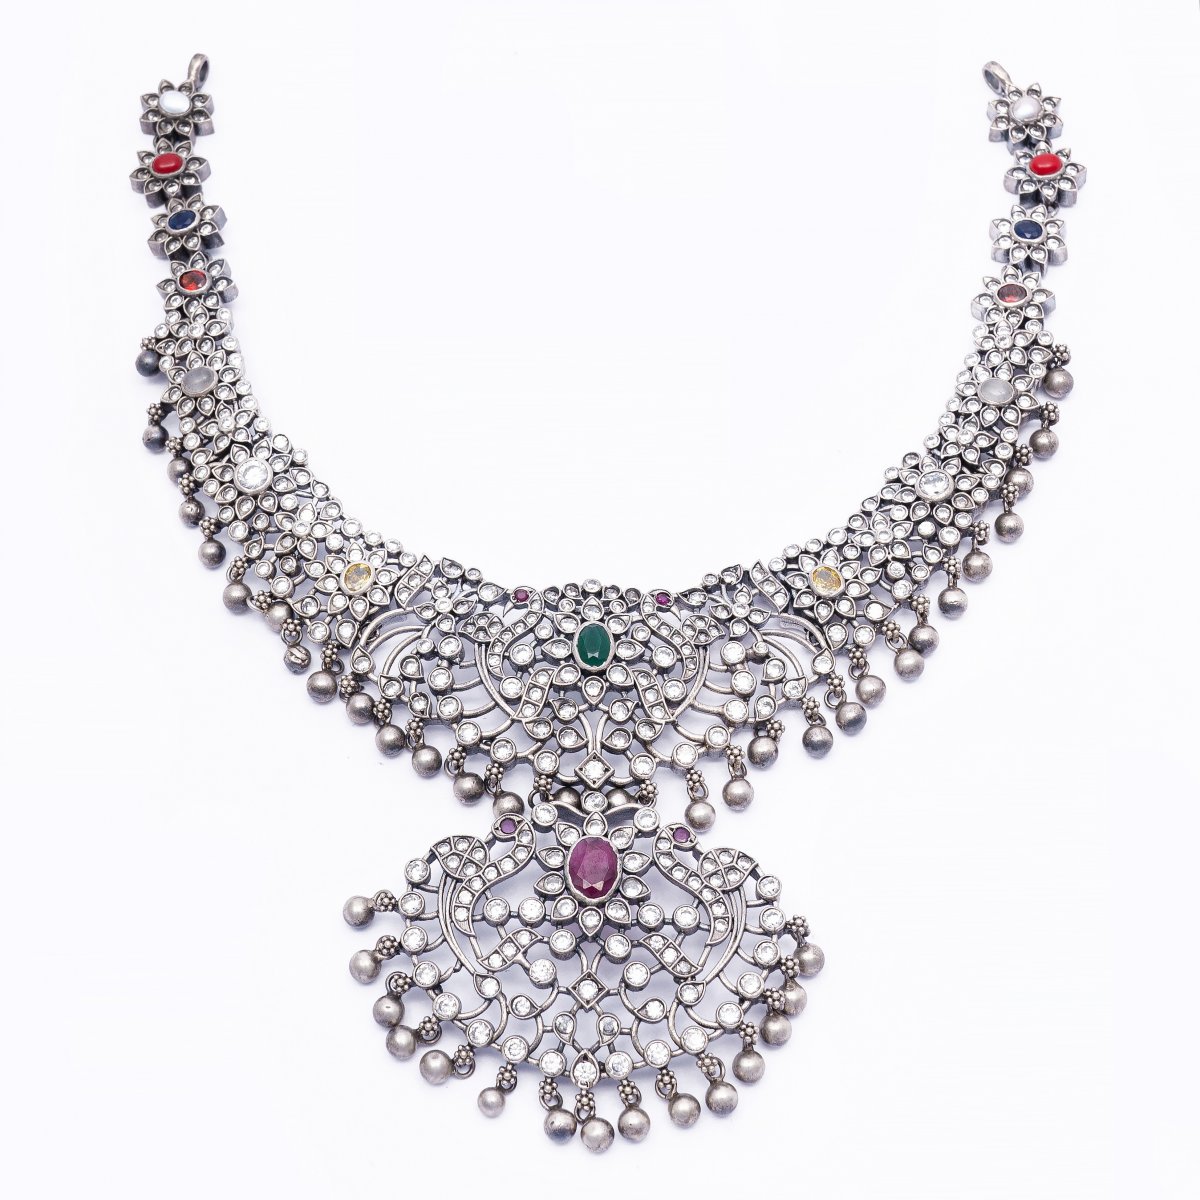 92.5 SILVER NAVRT SOUTH INDIAN TRADITIONAL NECKLACE FOR WOMEN 